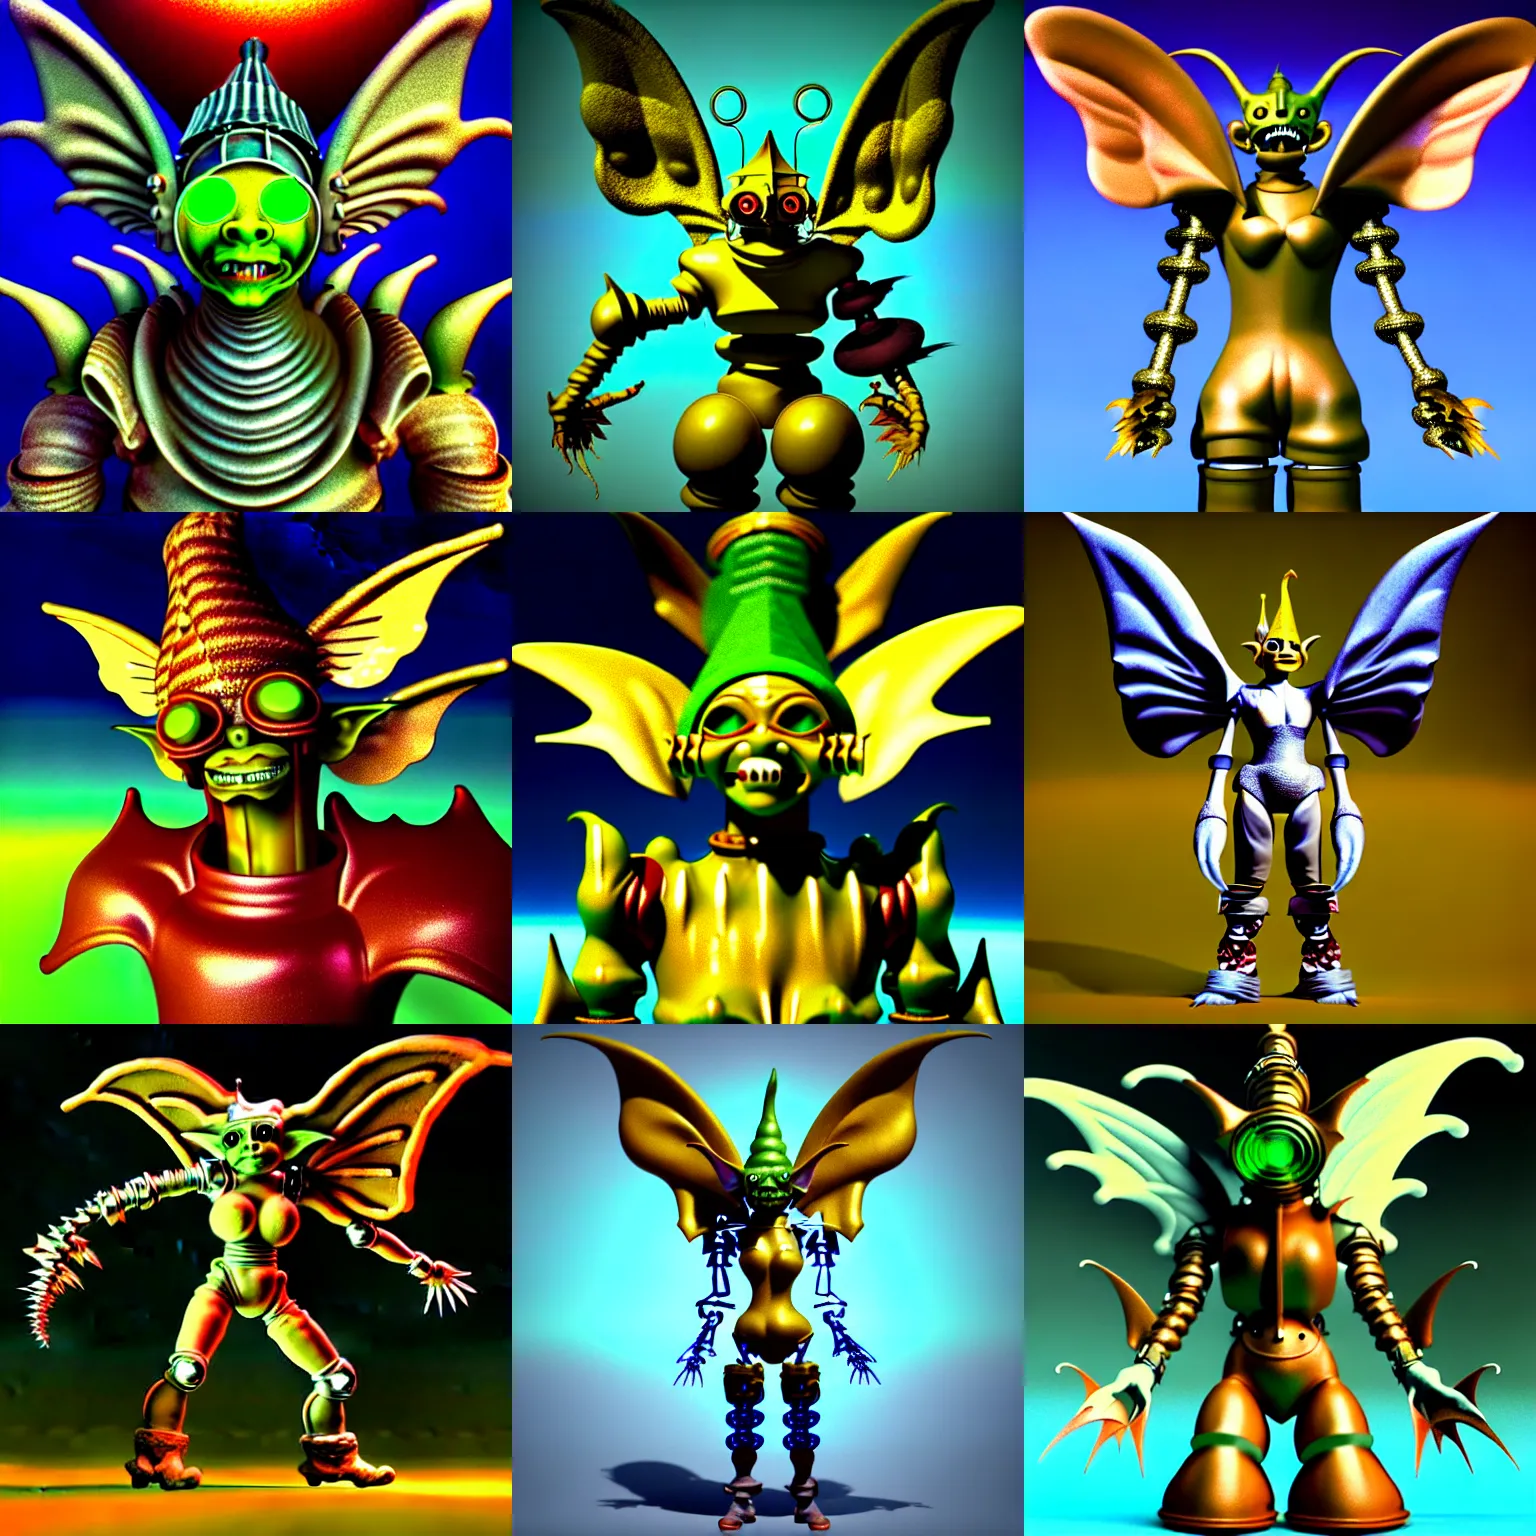 Prompt: vintage cgi 3 d render of cyborg goblin in the style of micha klein final fantasy ix by ichiro tanida wearing a big bell hat and wearing angel wings against a psychedelic swirly background with 3 d butterflies and 3 d flowers n the style of 1 9 9 0's cg graphics 3 d rendered by micha klein lightwave, 3 do magazine